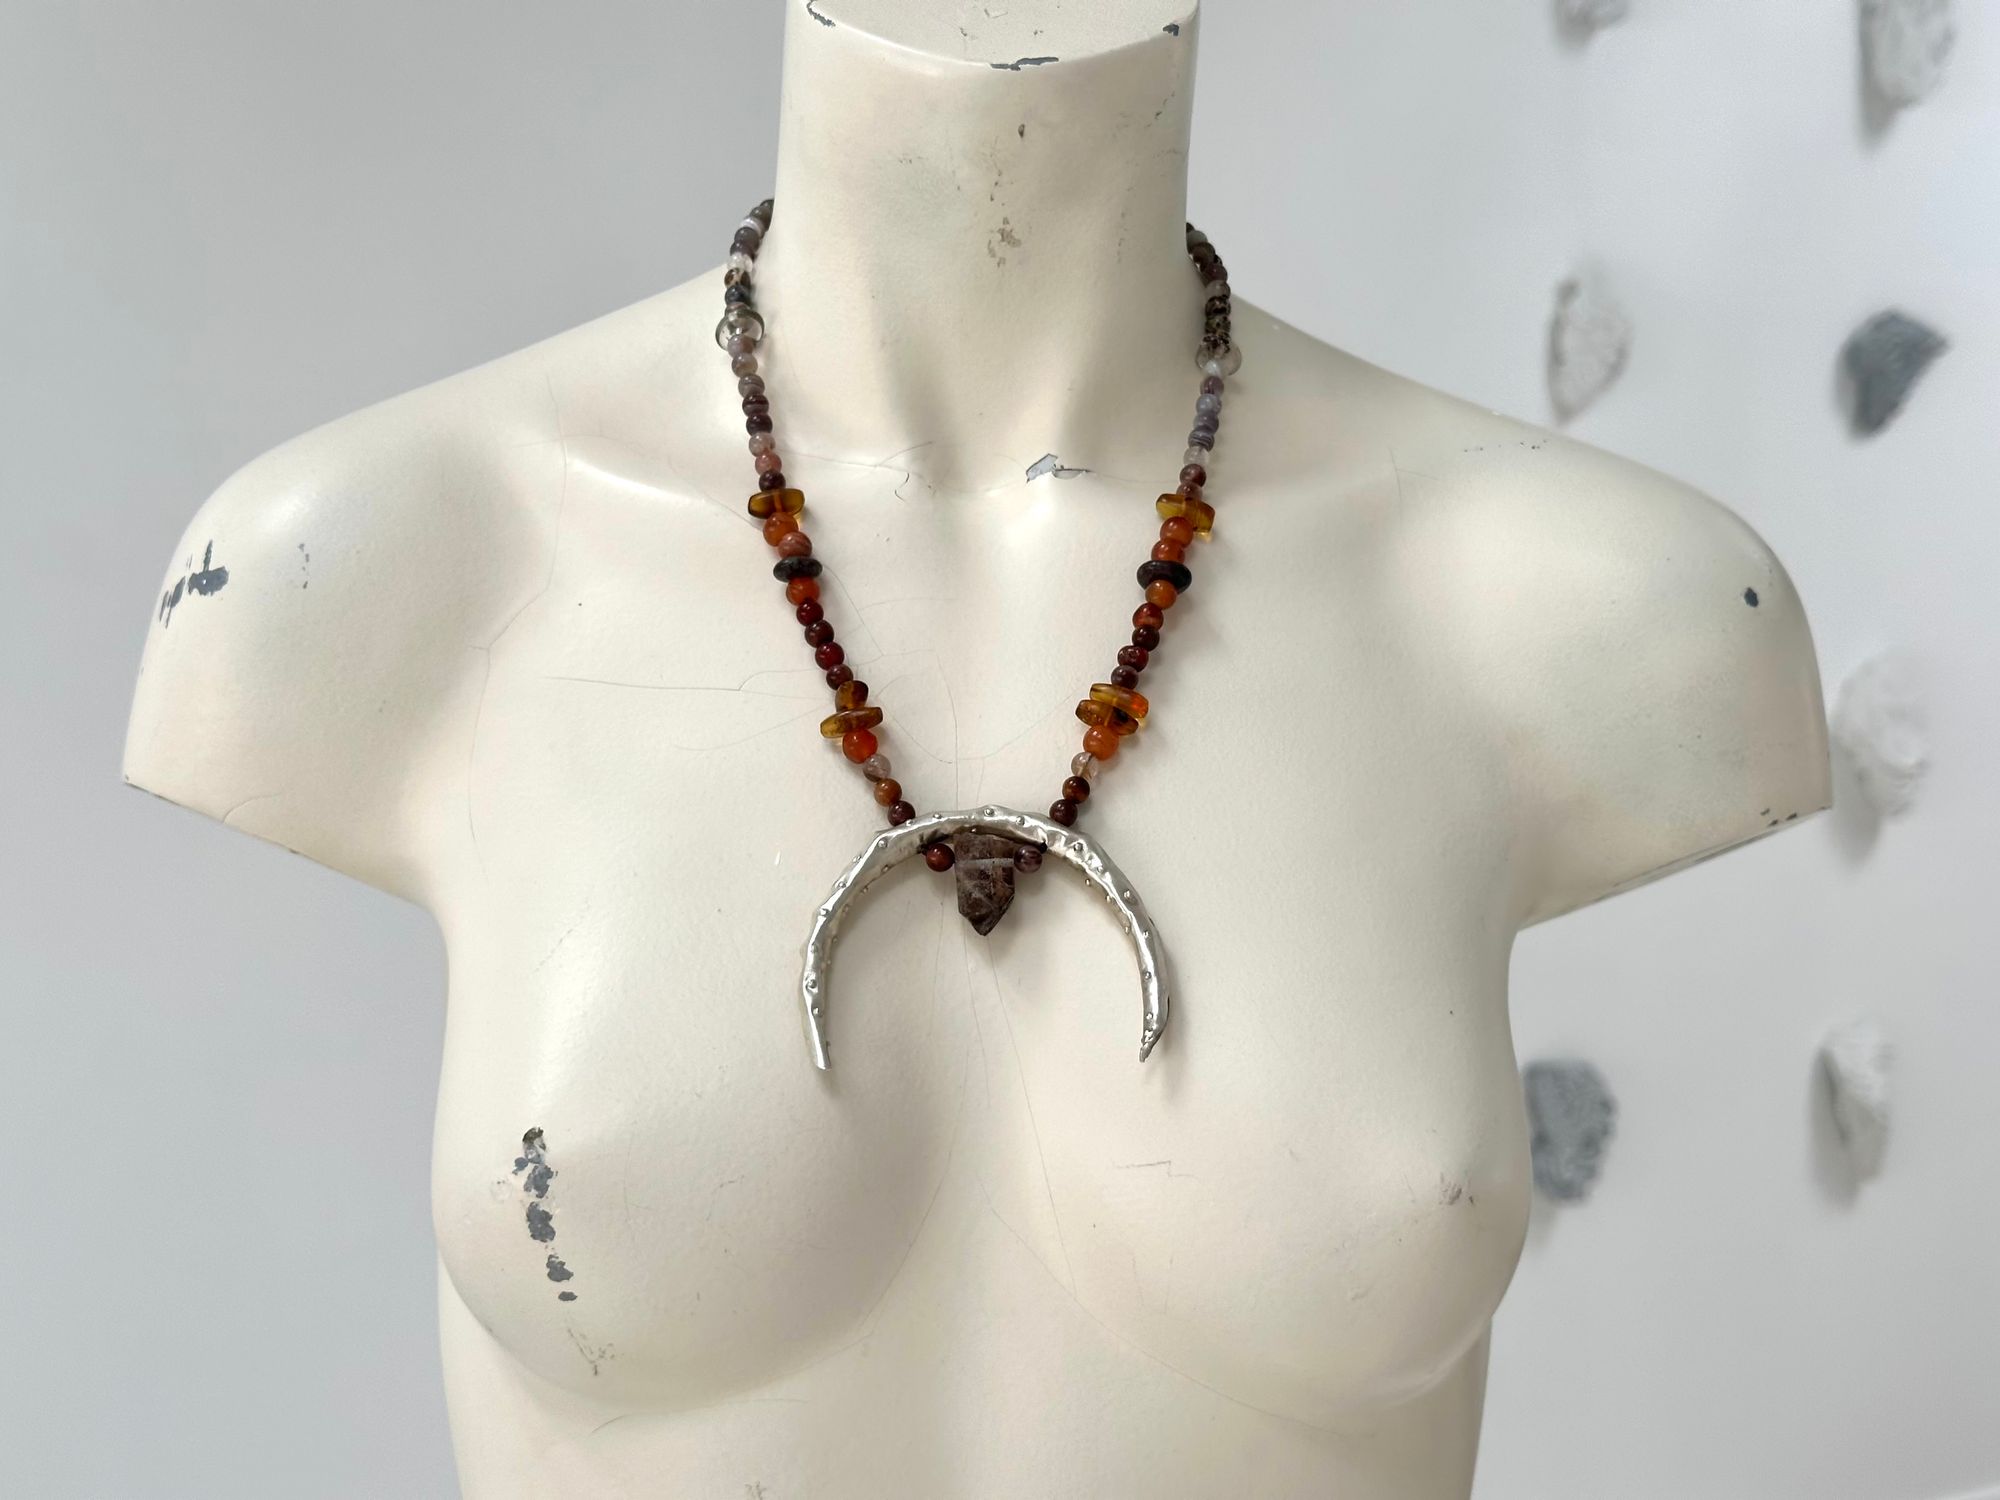 A painted white mannequin wears a necklace with a silver Crescent moon shape And beads of Amber Quartz and agate in soft warm earth tones